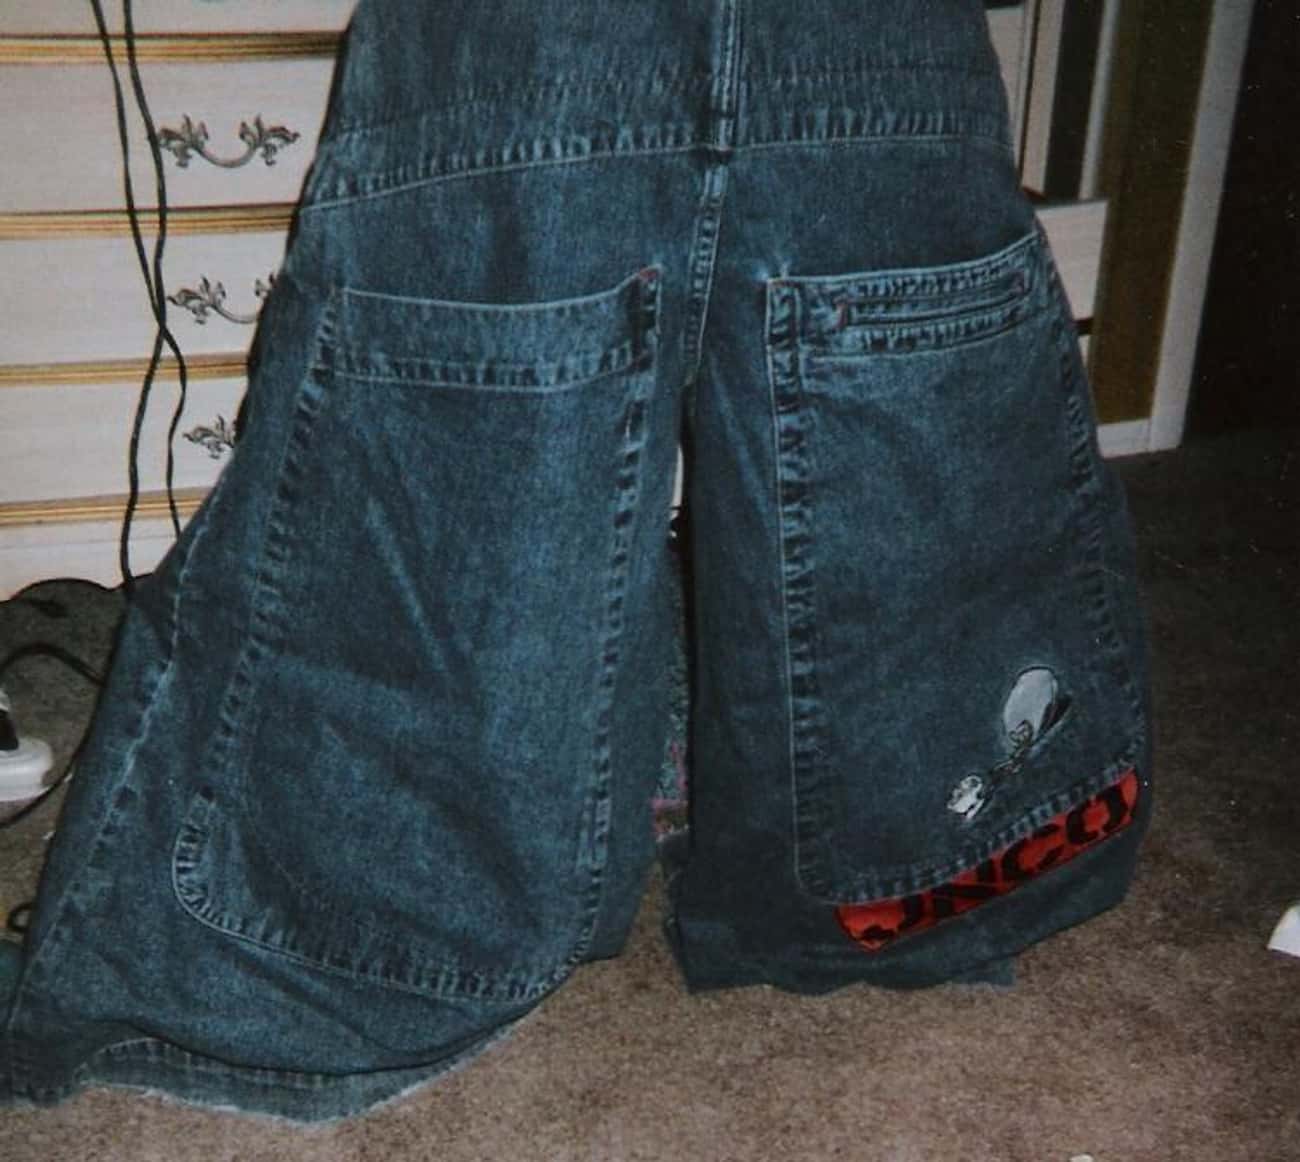 Jnco Jeans for the Sk8er Boys (and Girls)